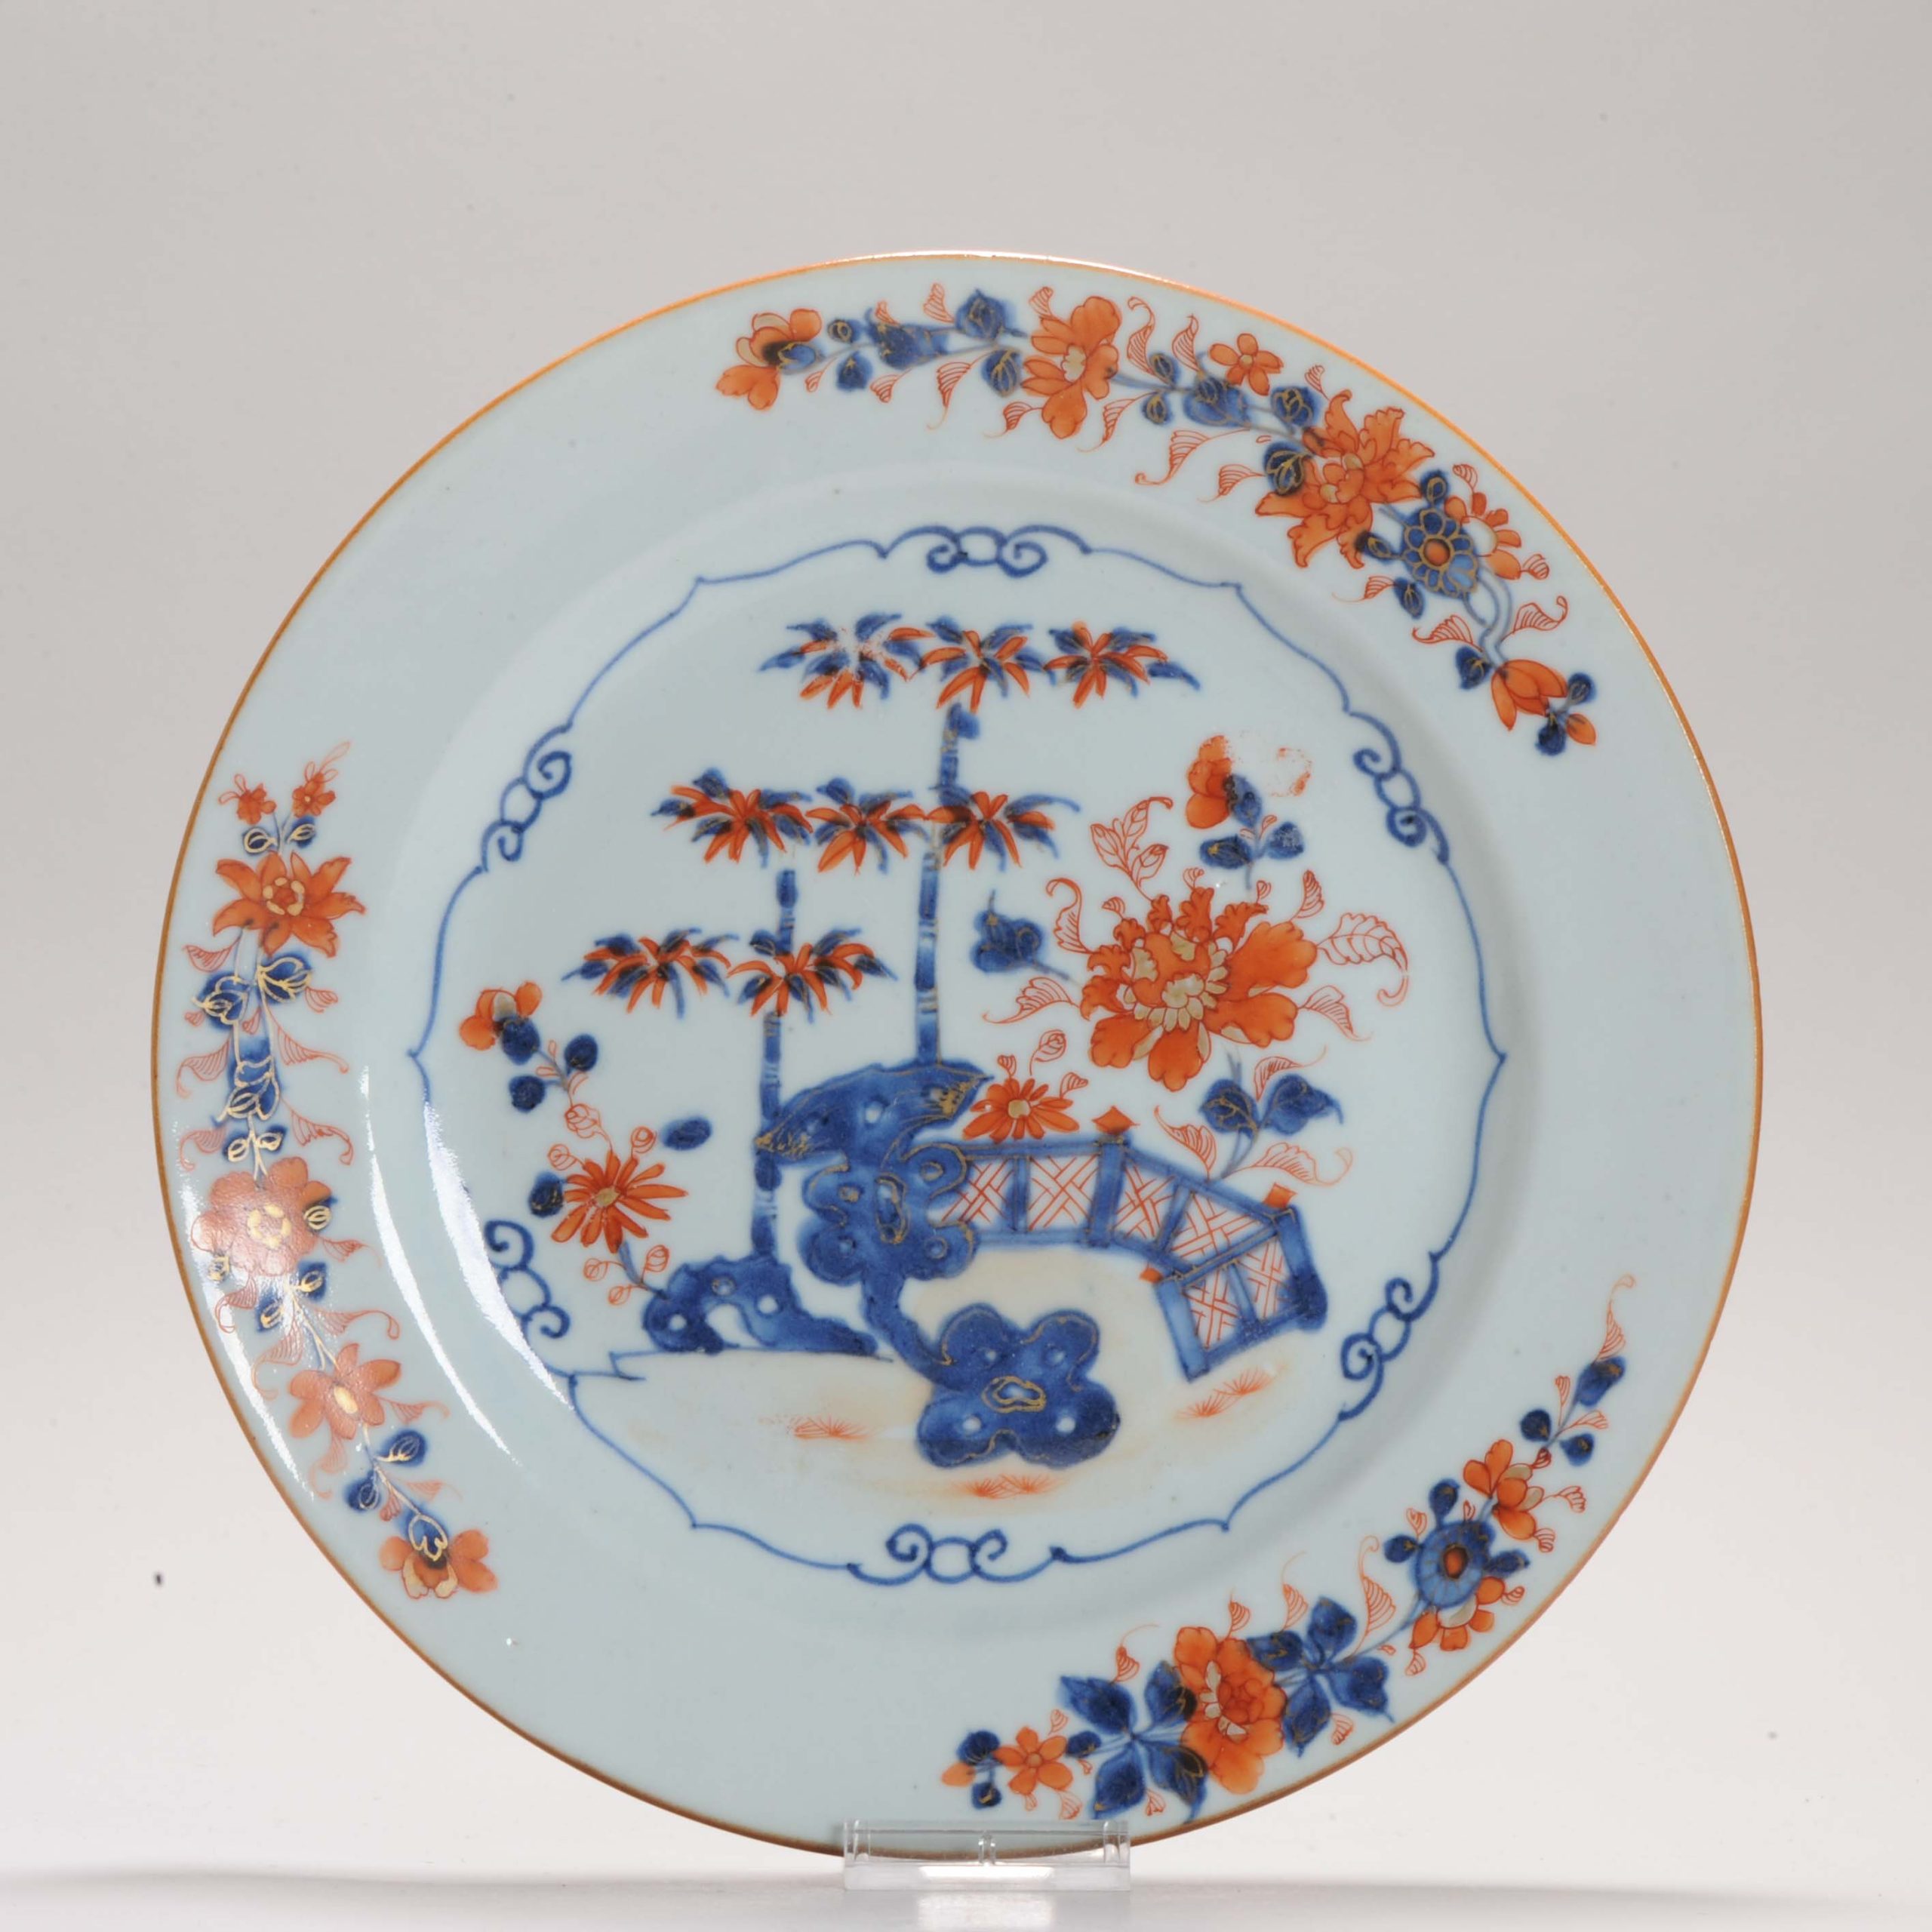 Antique Imari Chinese Plate 18th Garden and Bamboo Chinese Porcelain Kangxi Period